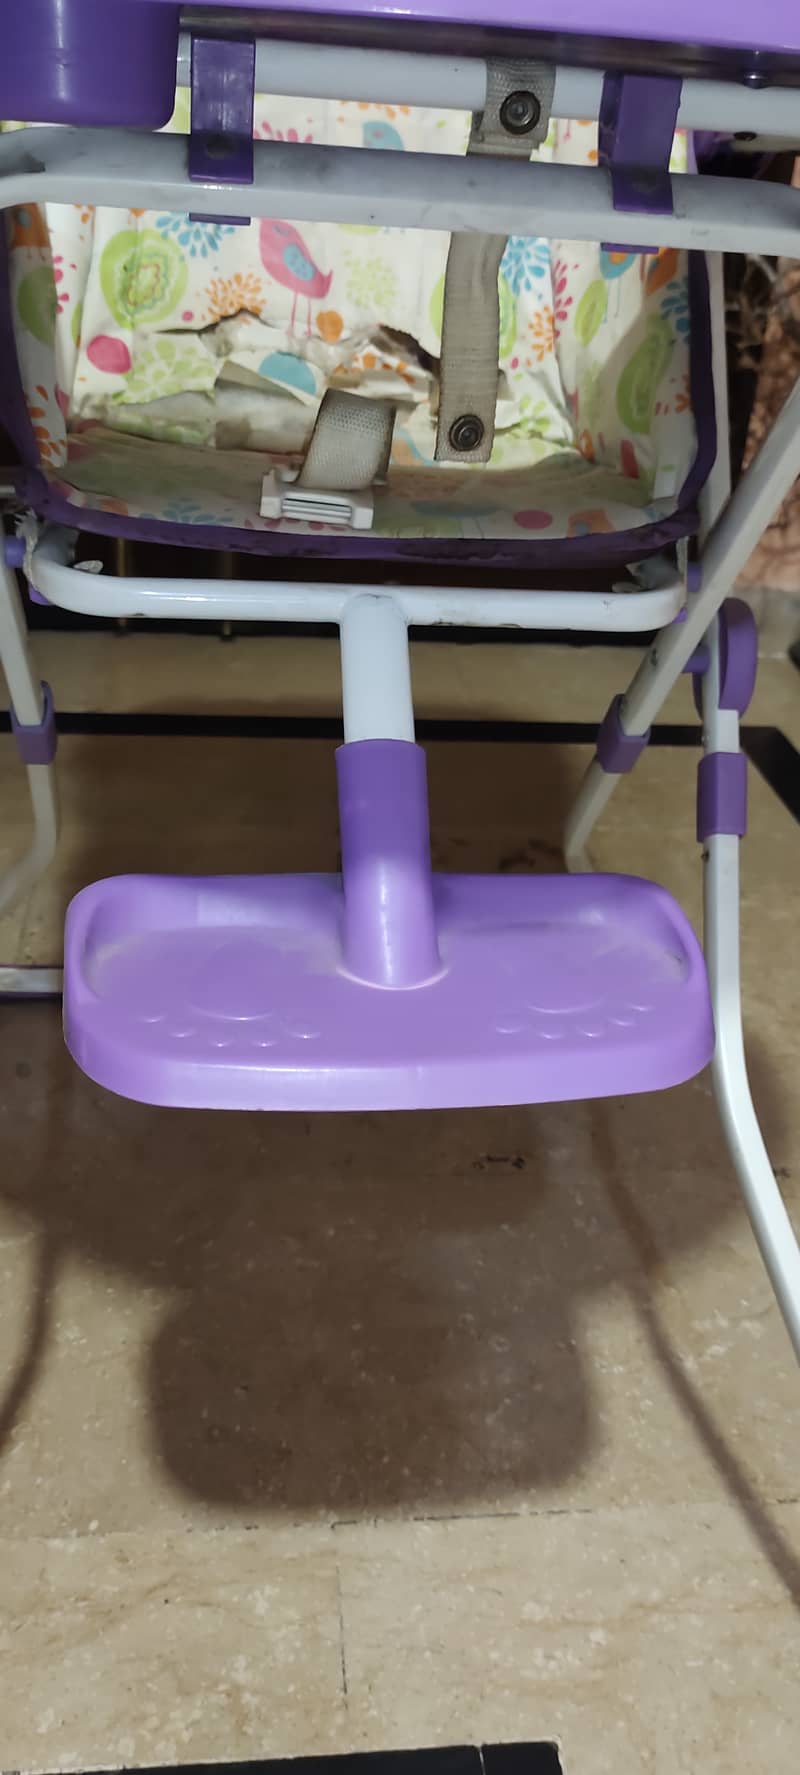 BABY DINNING CHAIR - (FOLDABLE) GOOD CONDITION 3